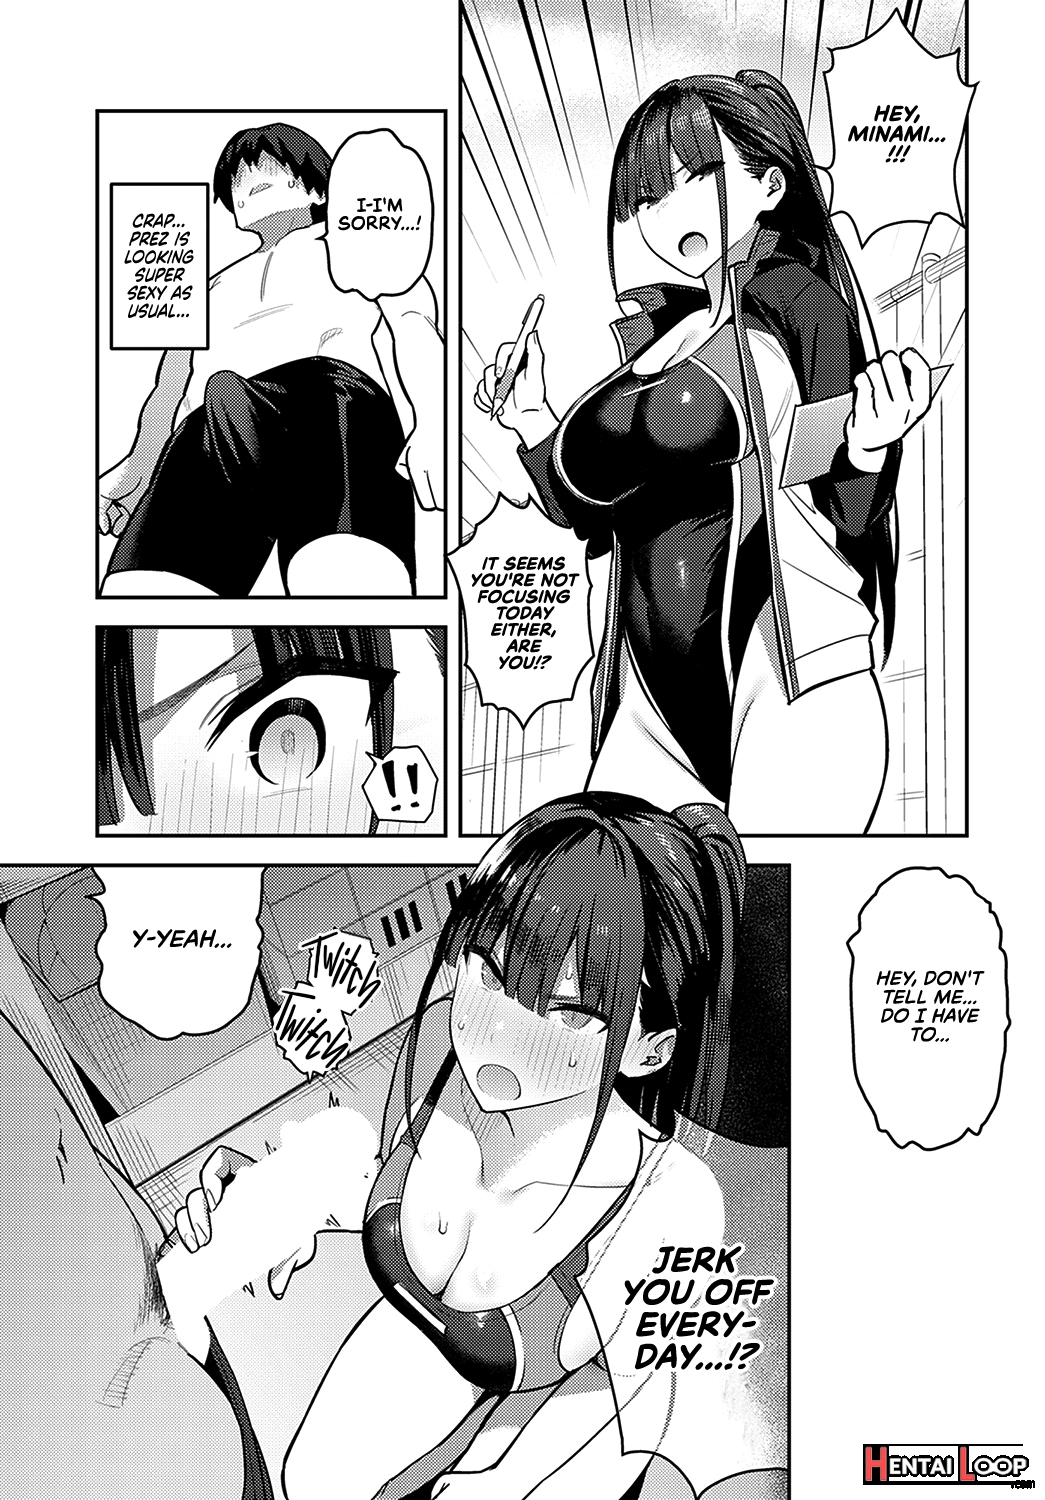 Getting Jerked Off By The Swimming Club Senpai page 11